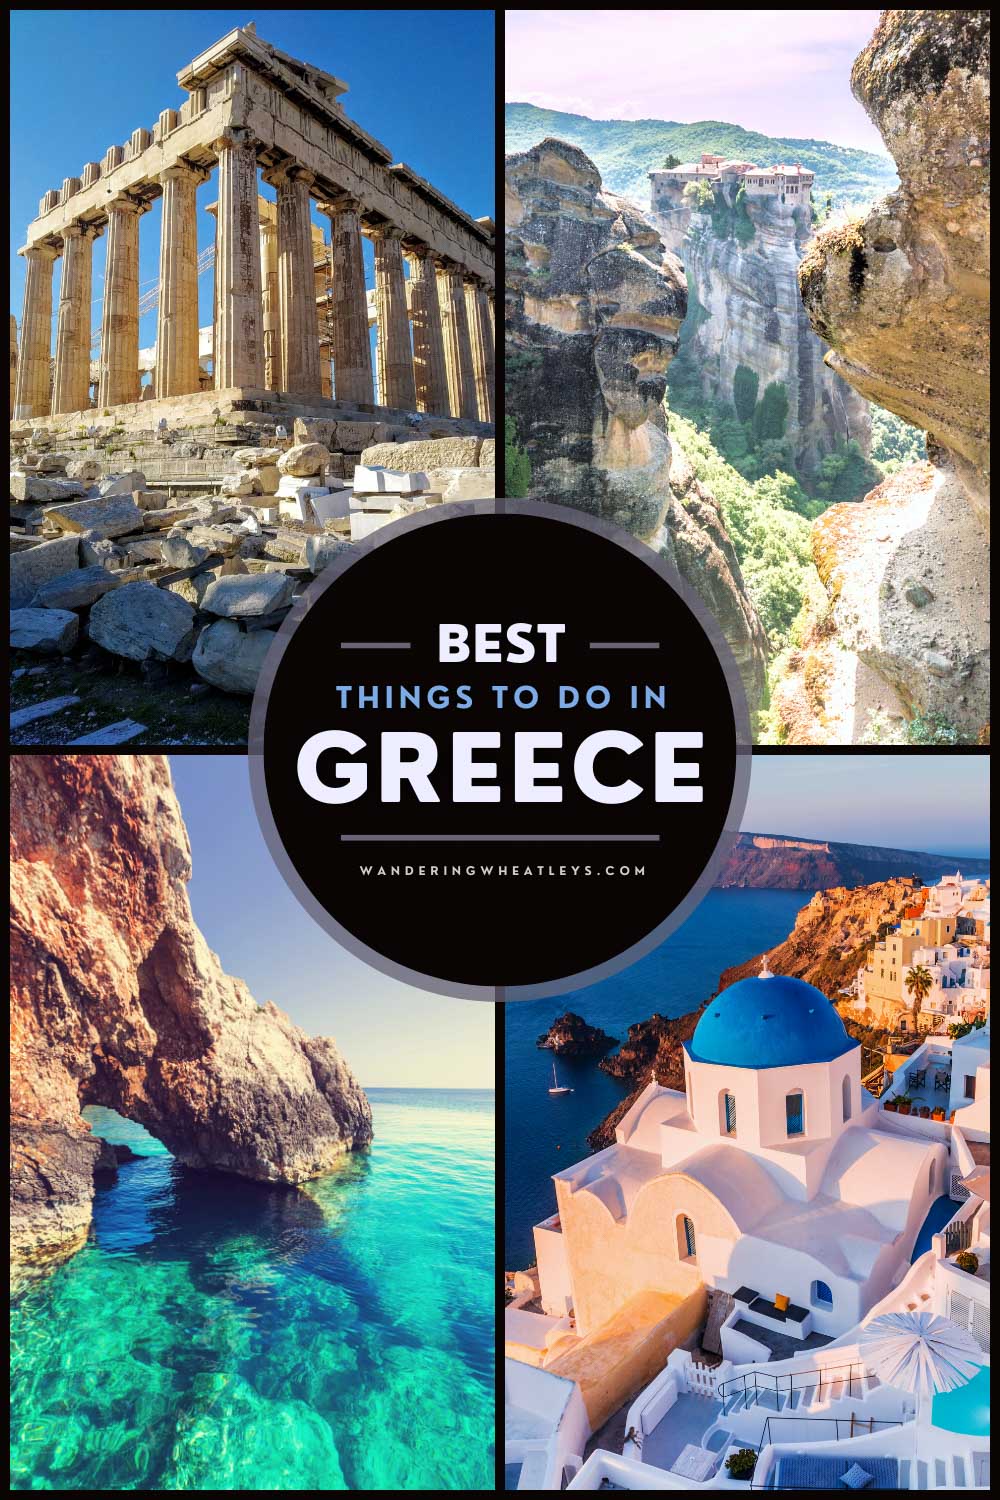 The Best Things to do in Greece